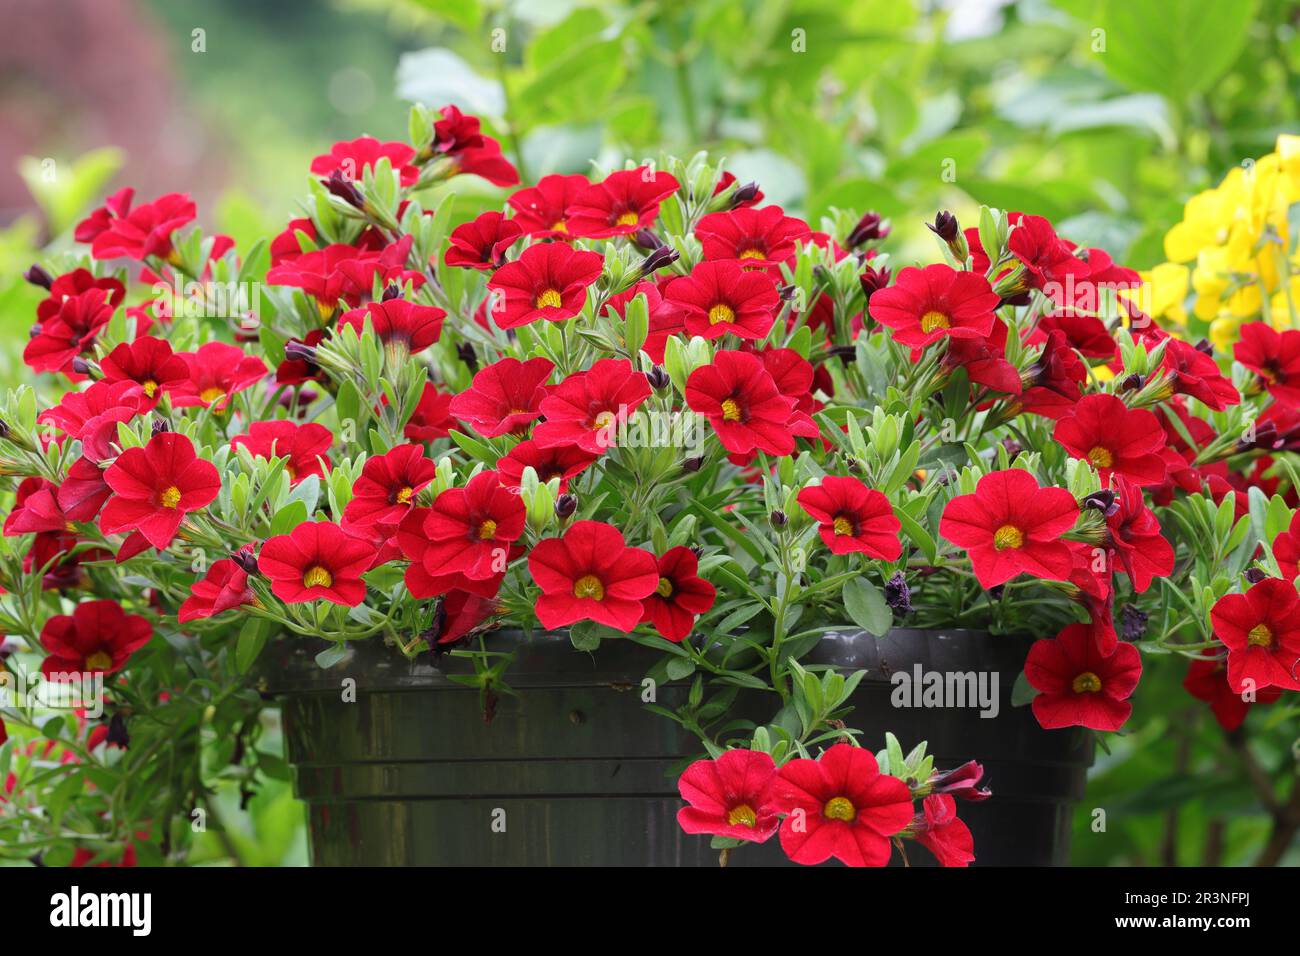 Close-up of the countless small flowers of a red Petunia hybrid in a black planter, side view Stock Photo